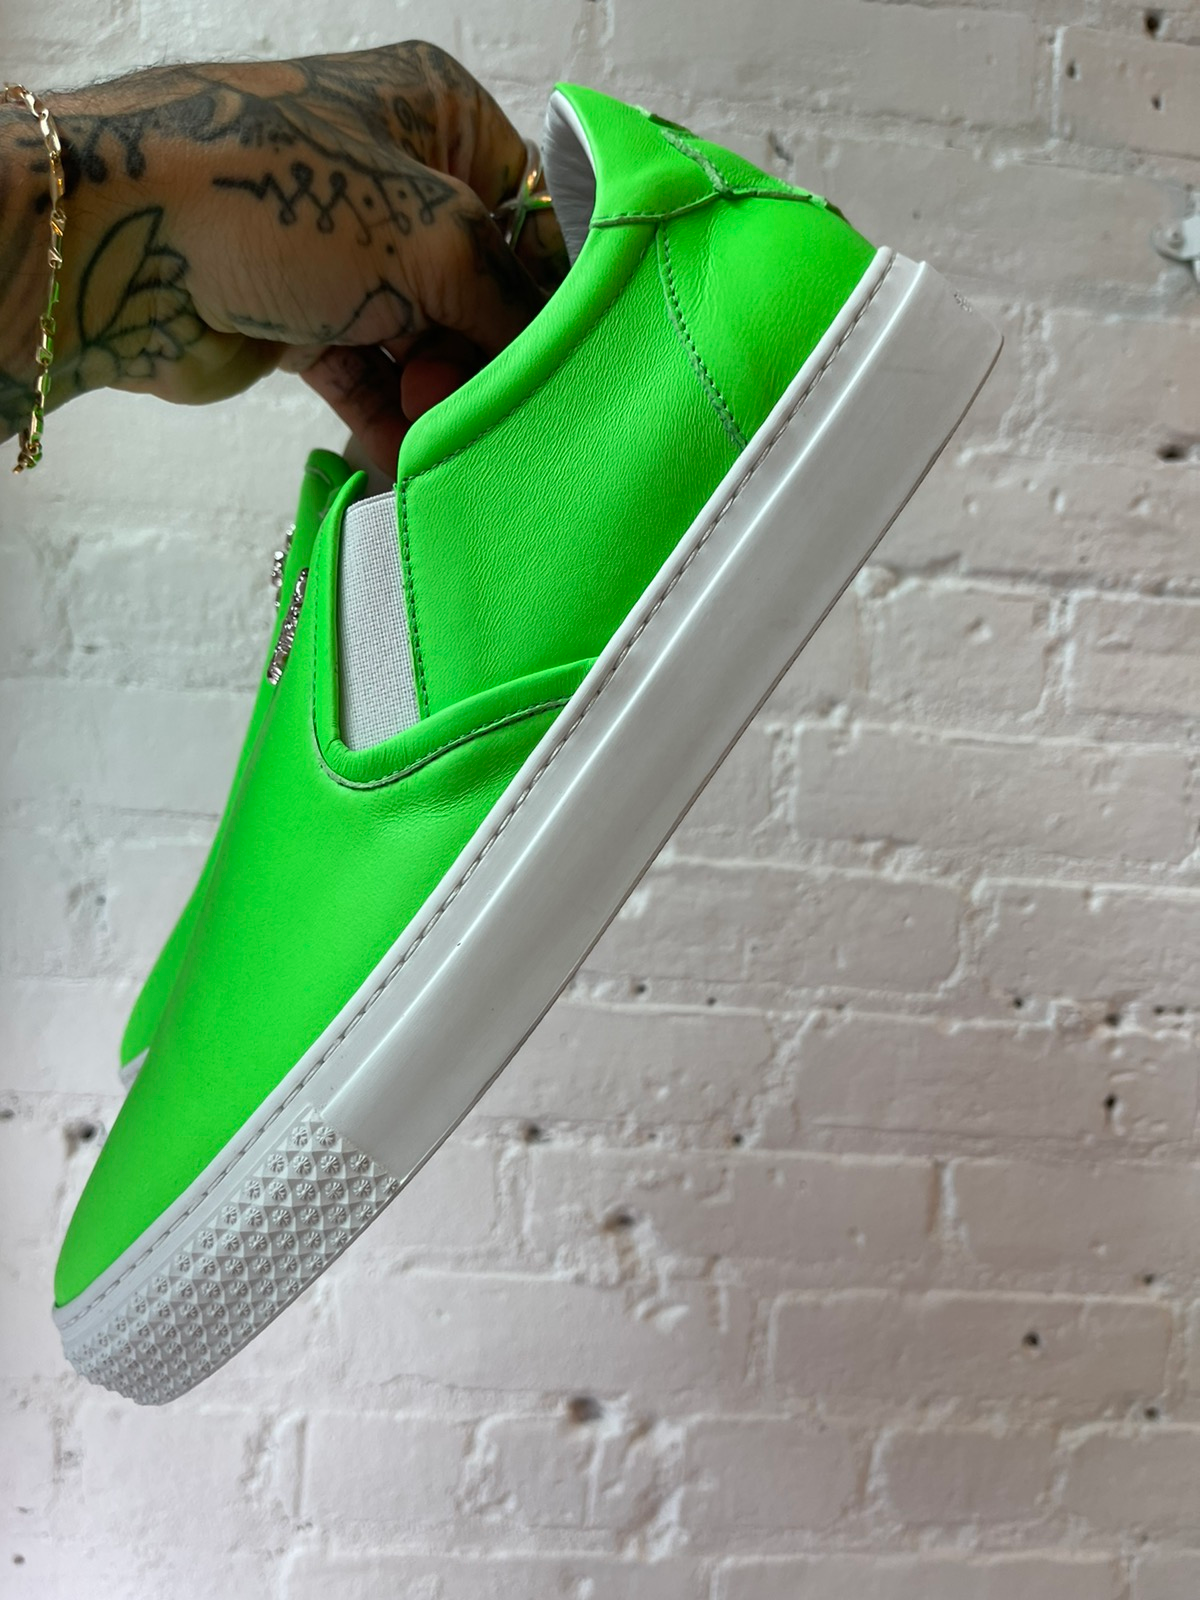 Chrome Hearts NEW Neon Lime Green LEATHER Slip On Sneakers